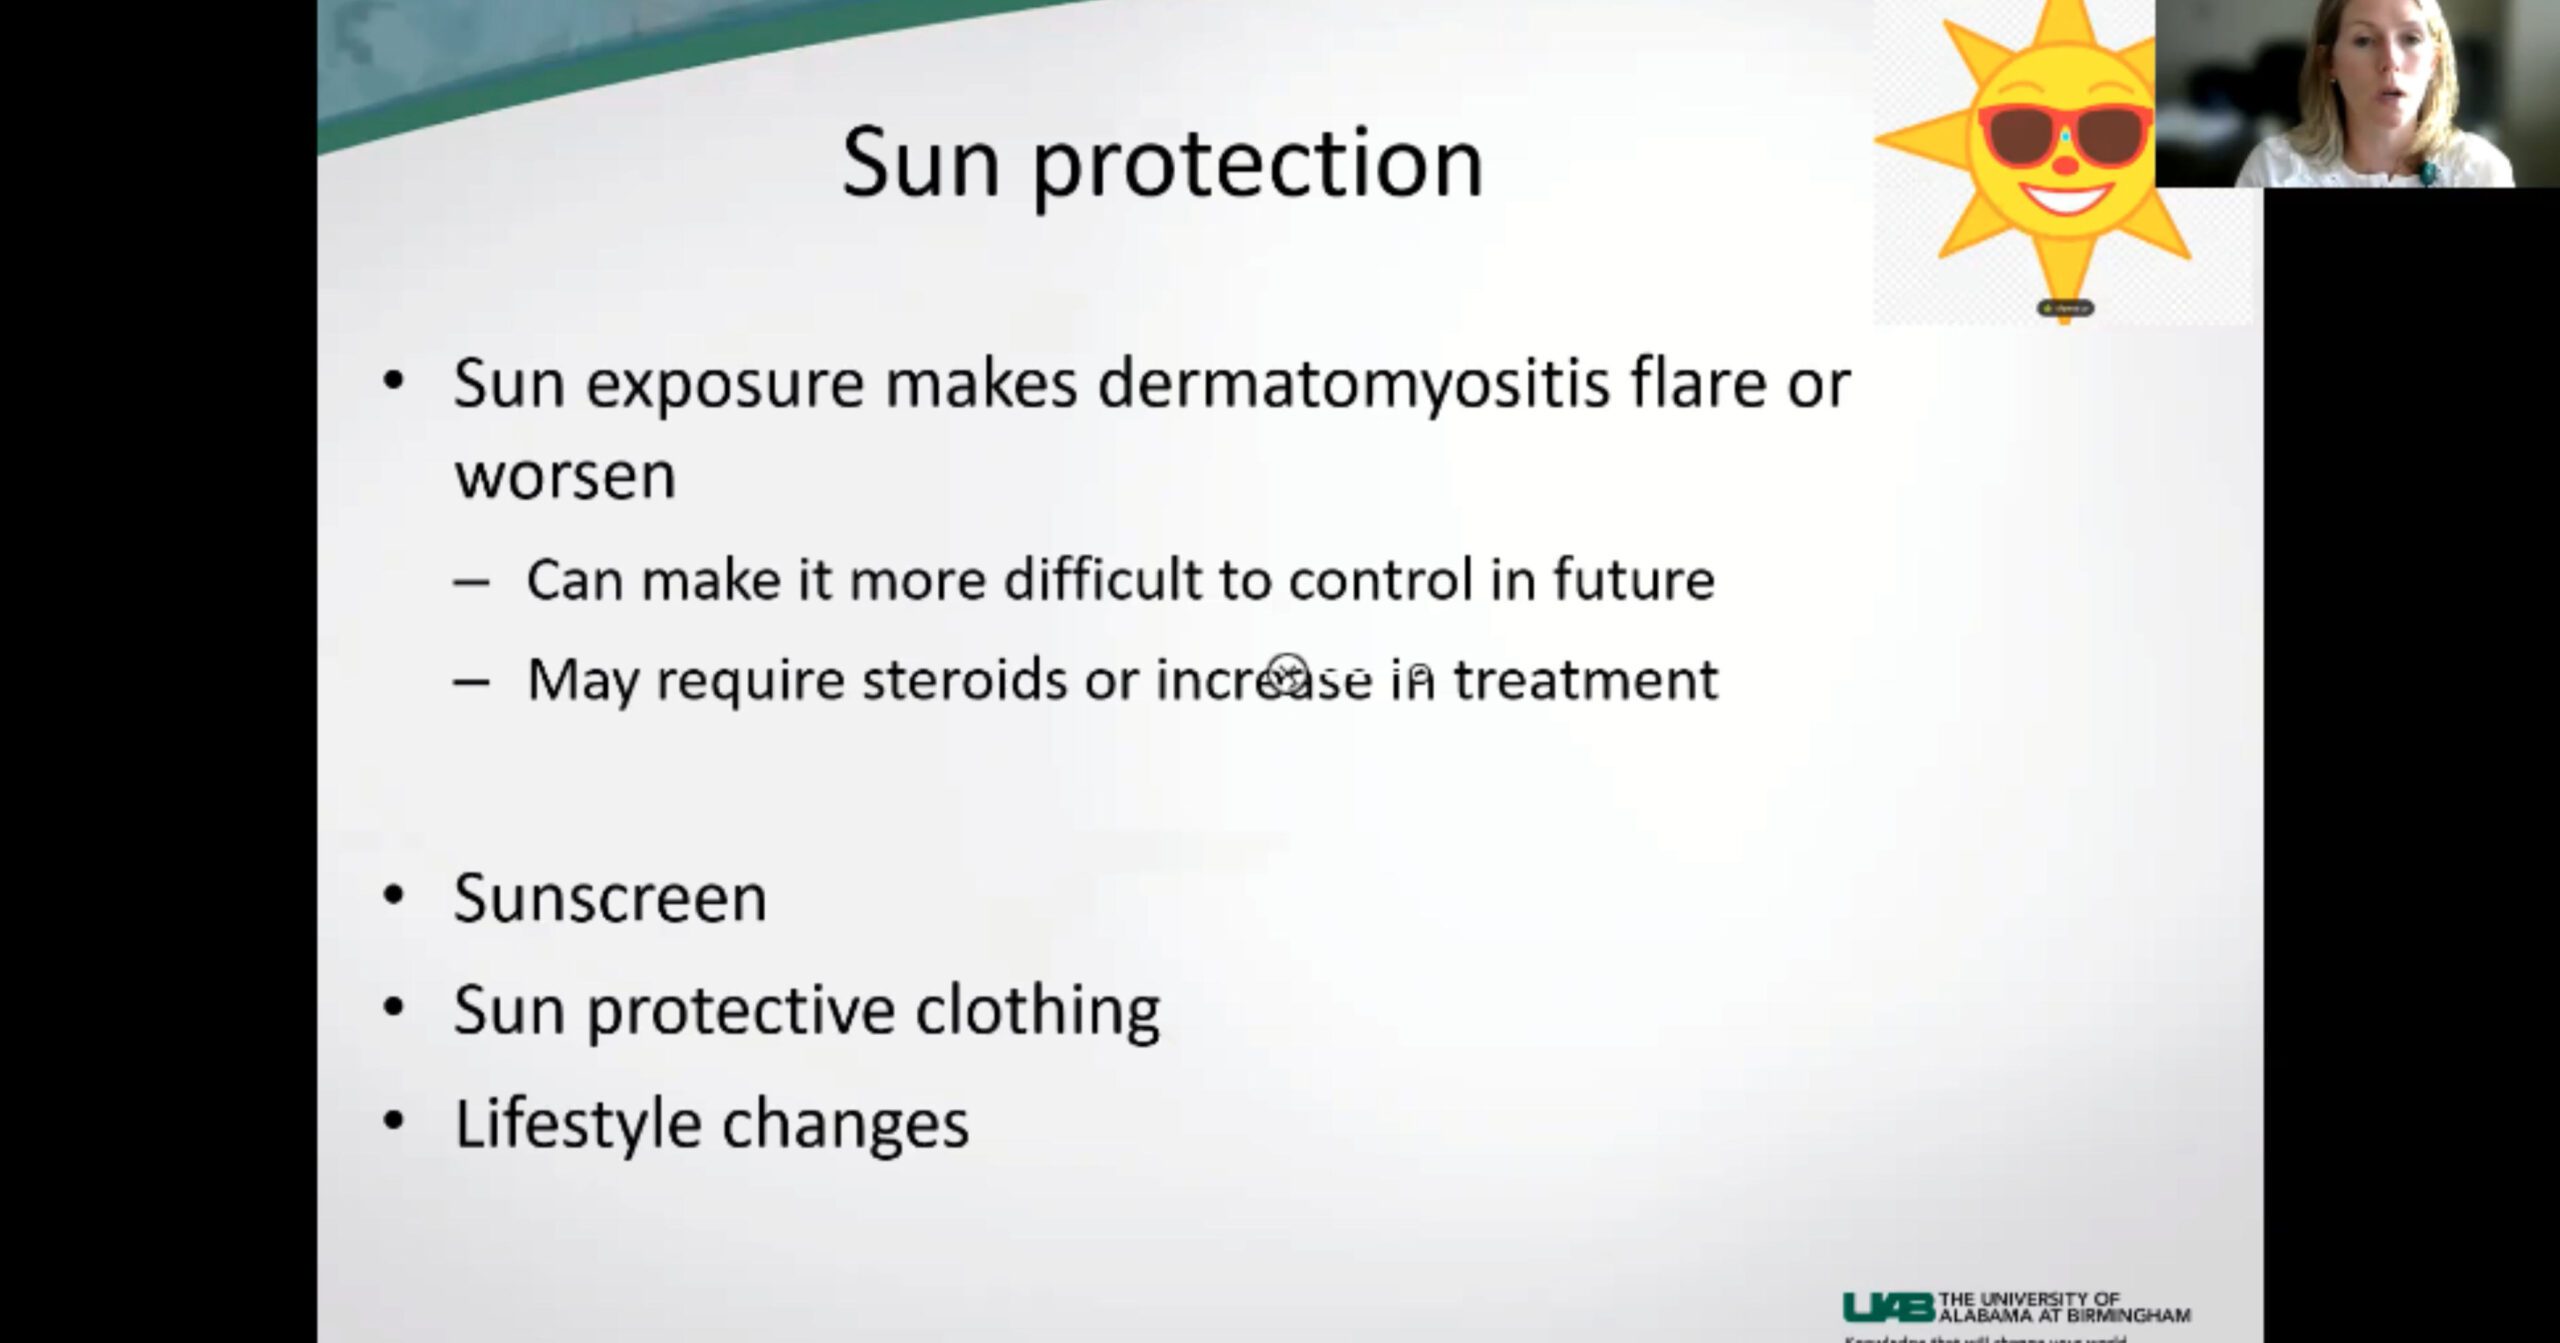 Dr. Lauren Graham, co-director of the Rheum/Derm clinic at UAB, Sun Protection